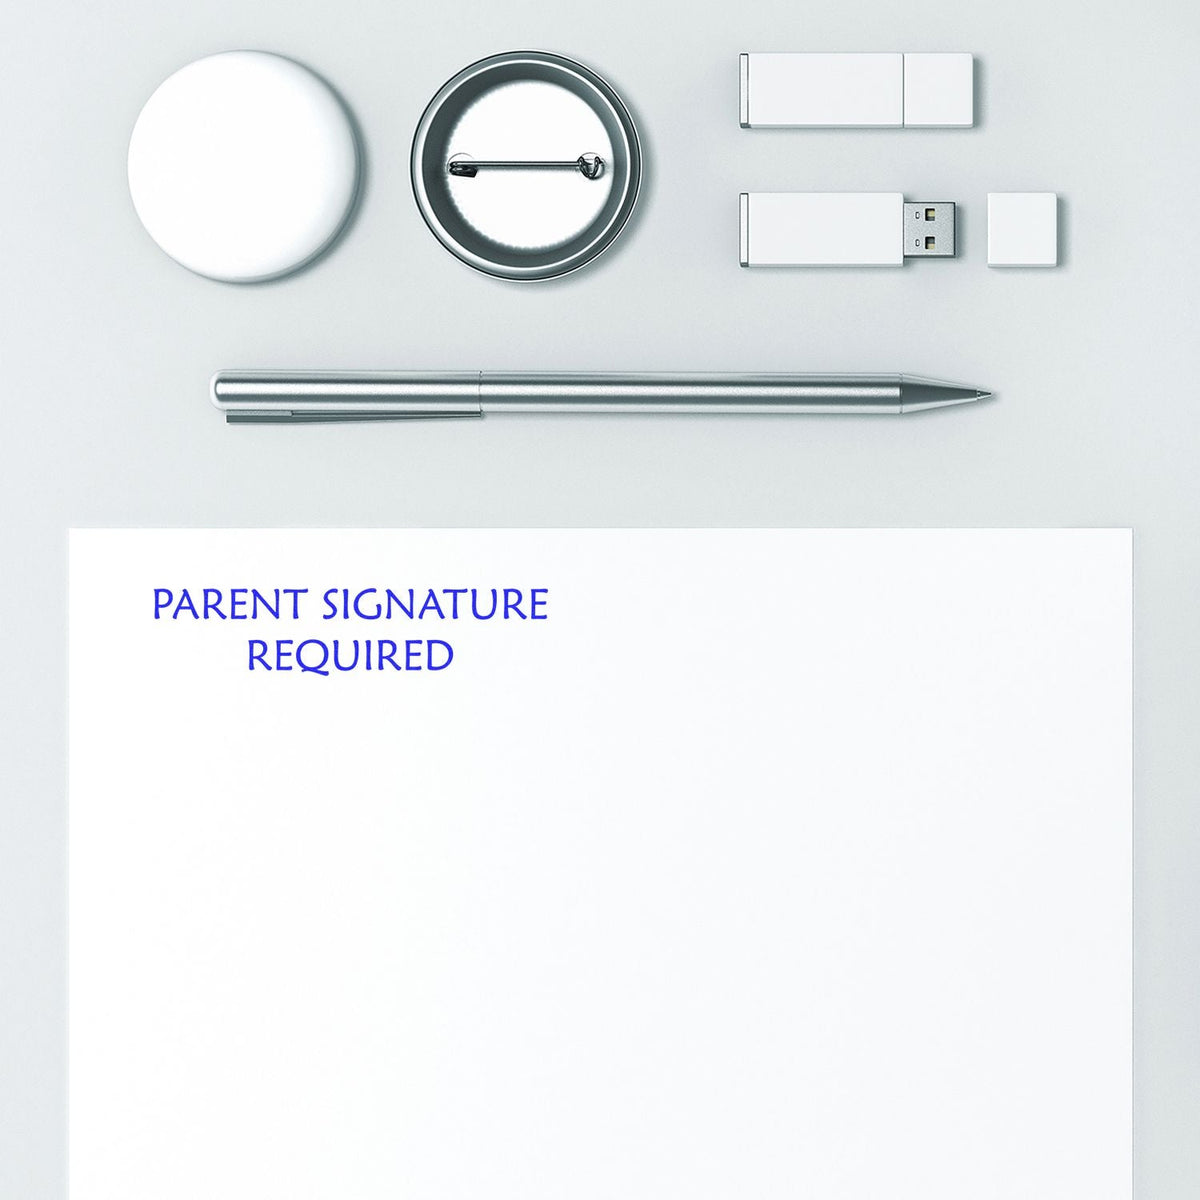 Self Inking Parent Signature Required Stamp In Use Photo